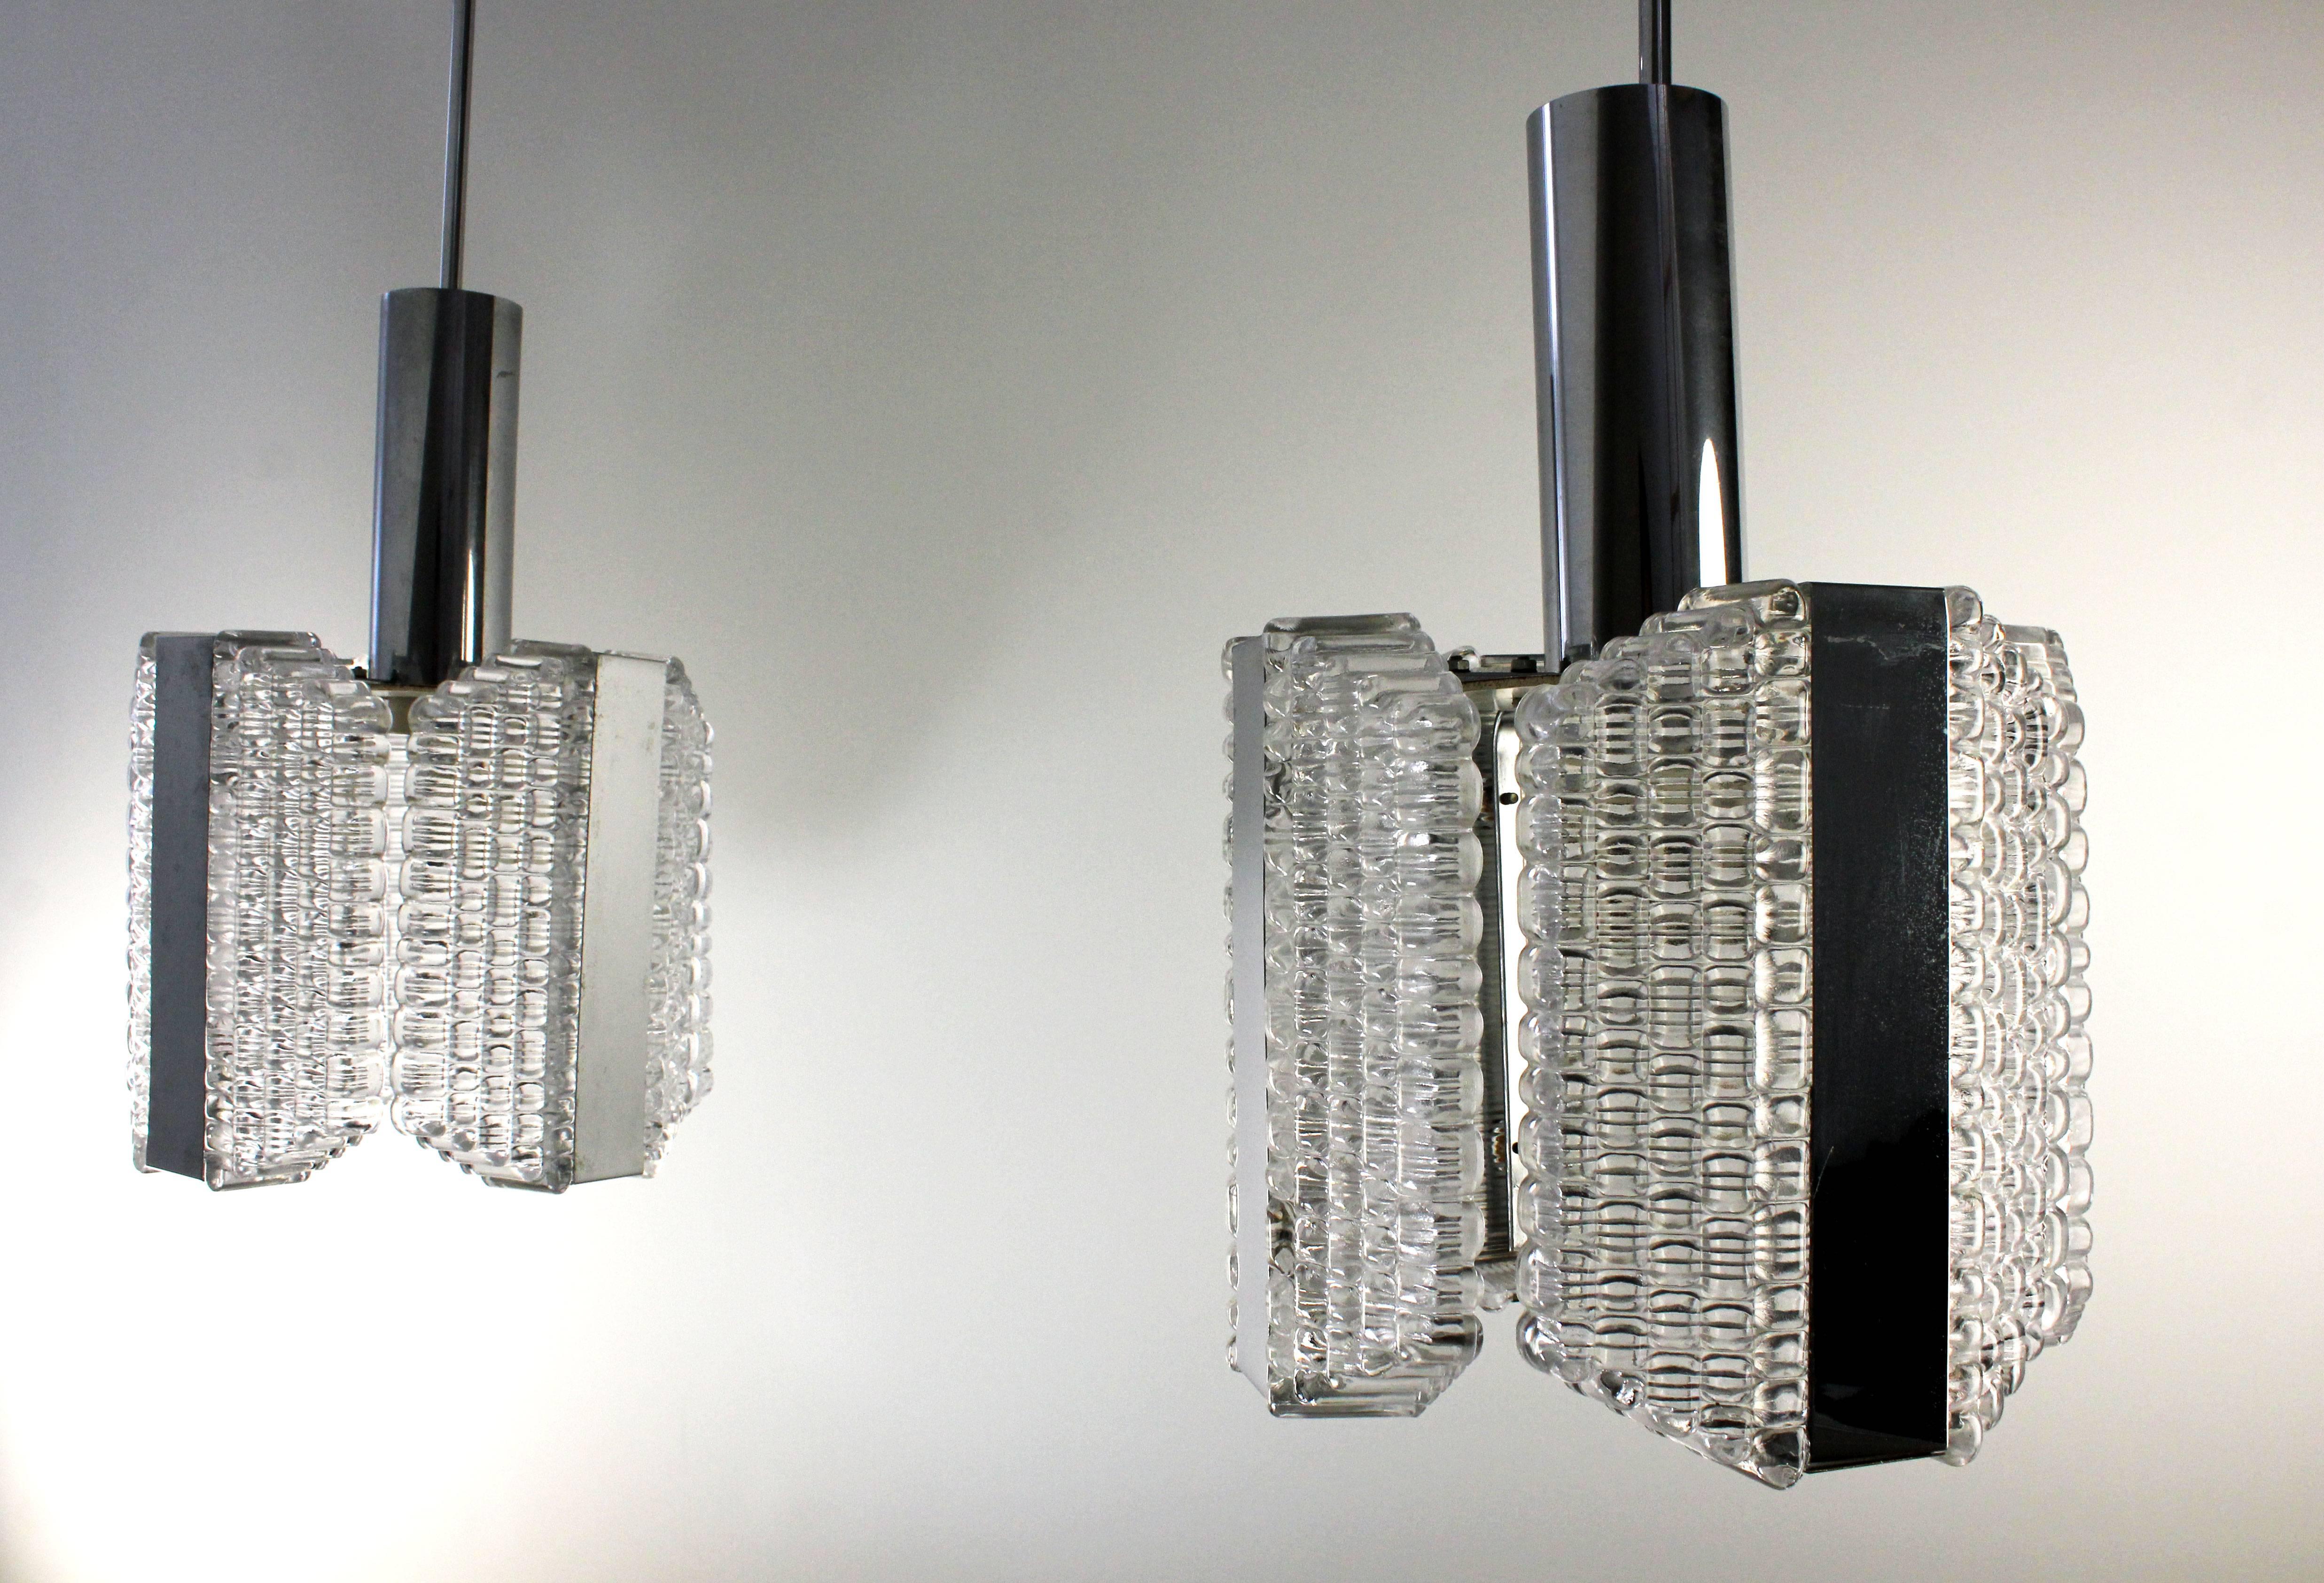 Pair of elegant pair of modernist space age pendants with four soft textured glass plates on chrome mount. Long slim chrome stem and canopy. Manufactured by Kaiser Leuchten in the 1960s. Labelled in canopy. E27 bulb. Great vintage condition.
Price